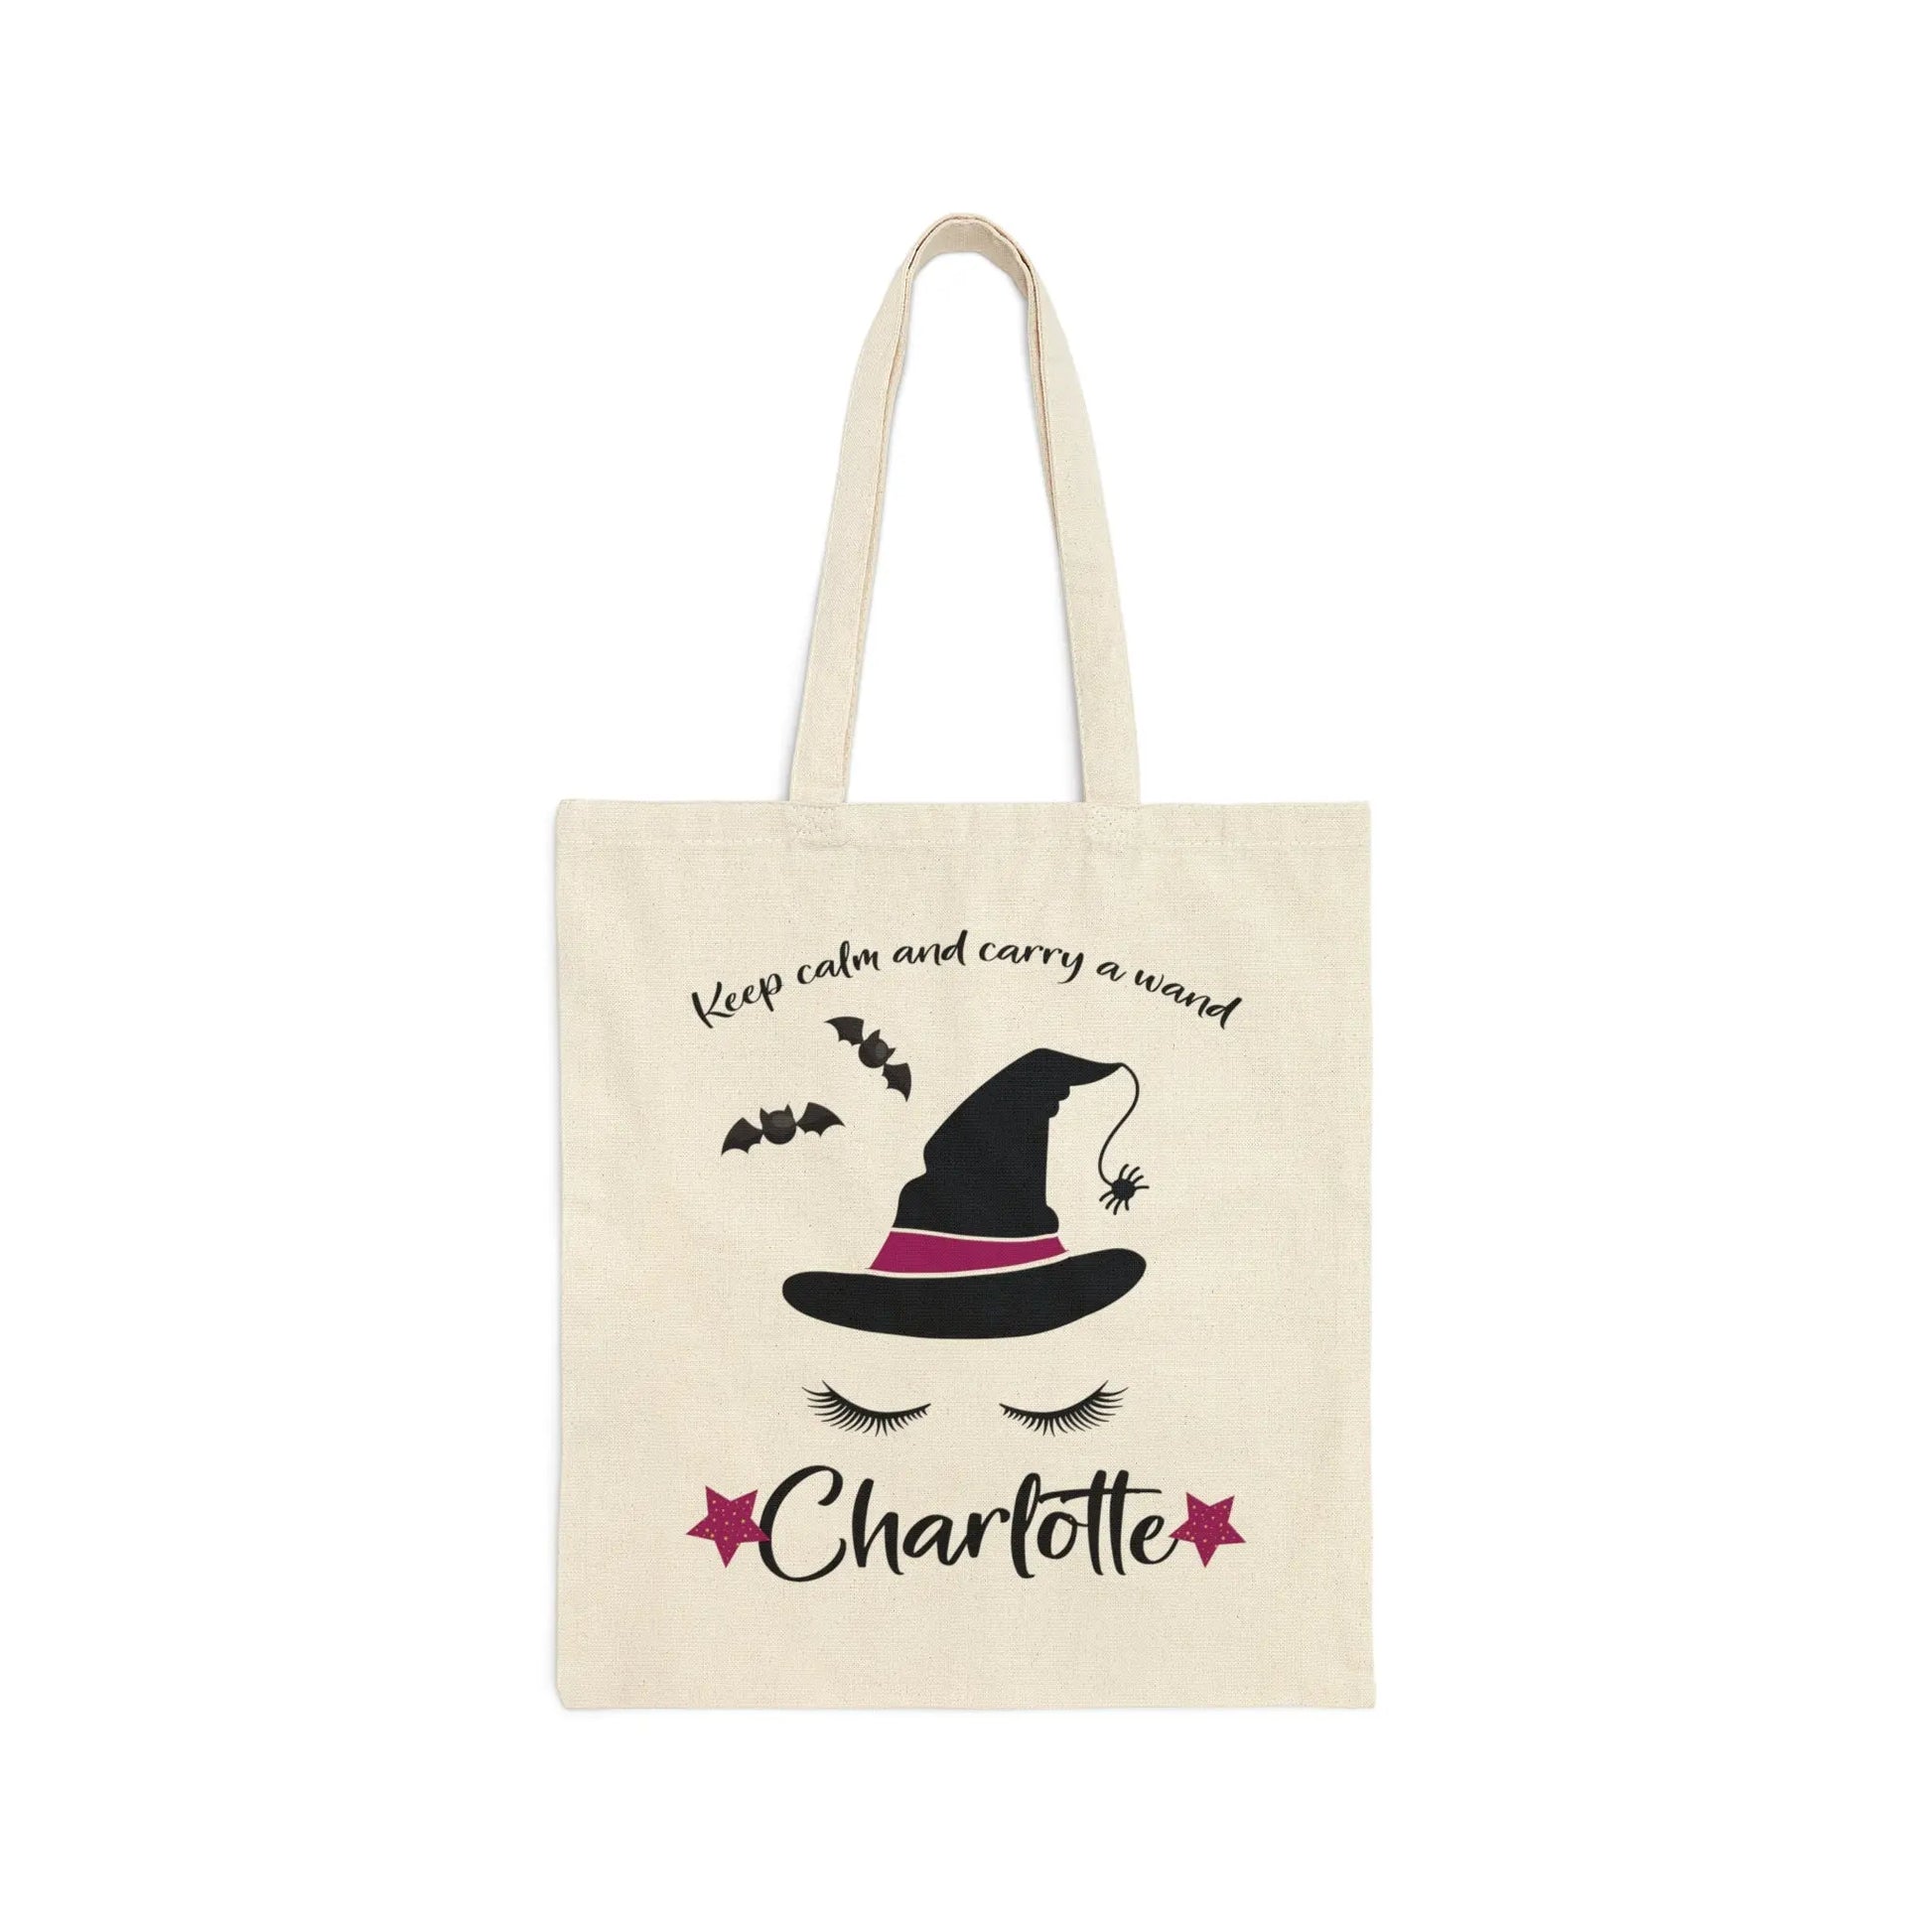 Witch Trick or Treat Canvas Tote Bag, Kids Halloween Bag Printify